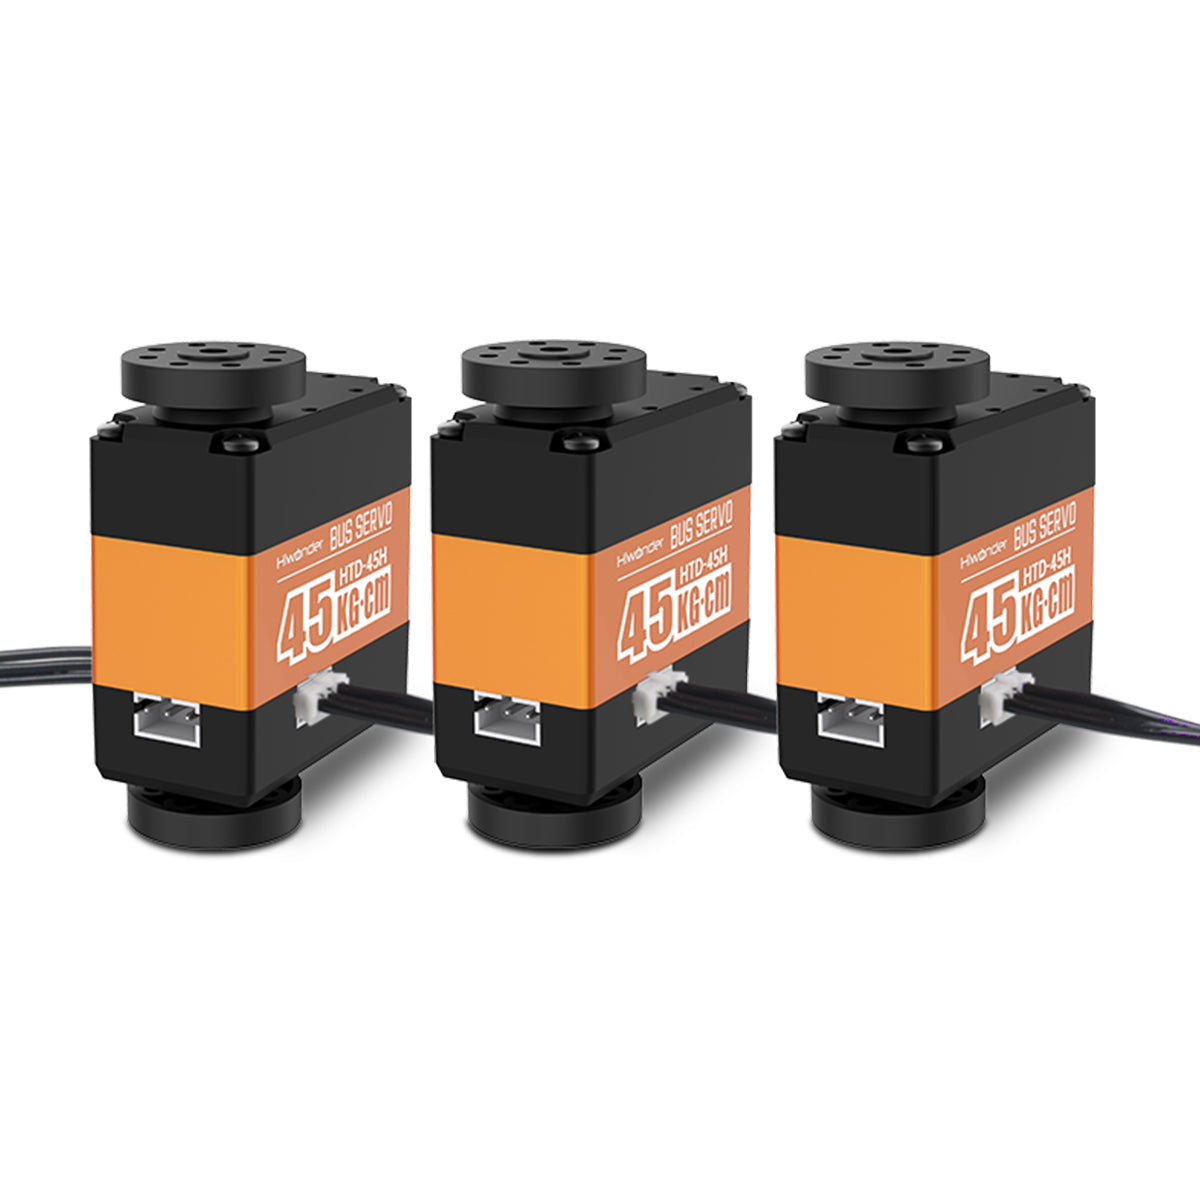 Hiwonder HTD-45H High Voltage Serial Bus Servo 45KG Torque with Three Connectors and Data Feedback